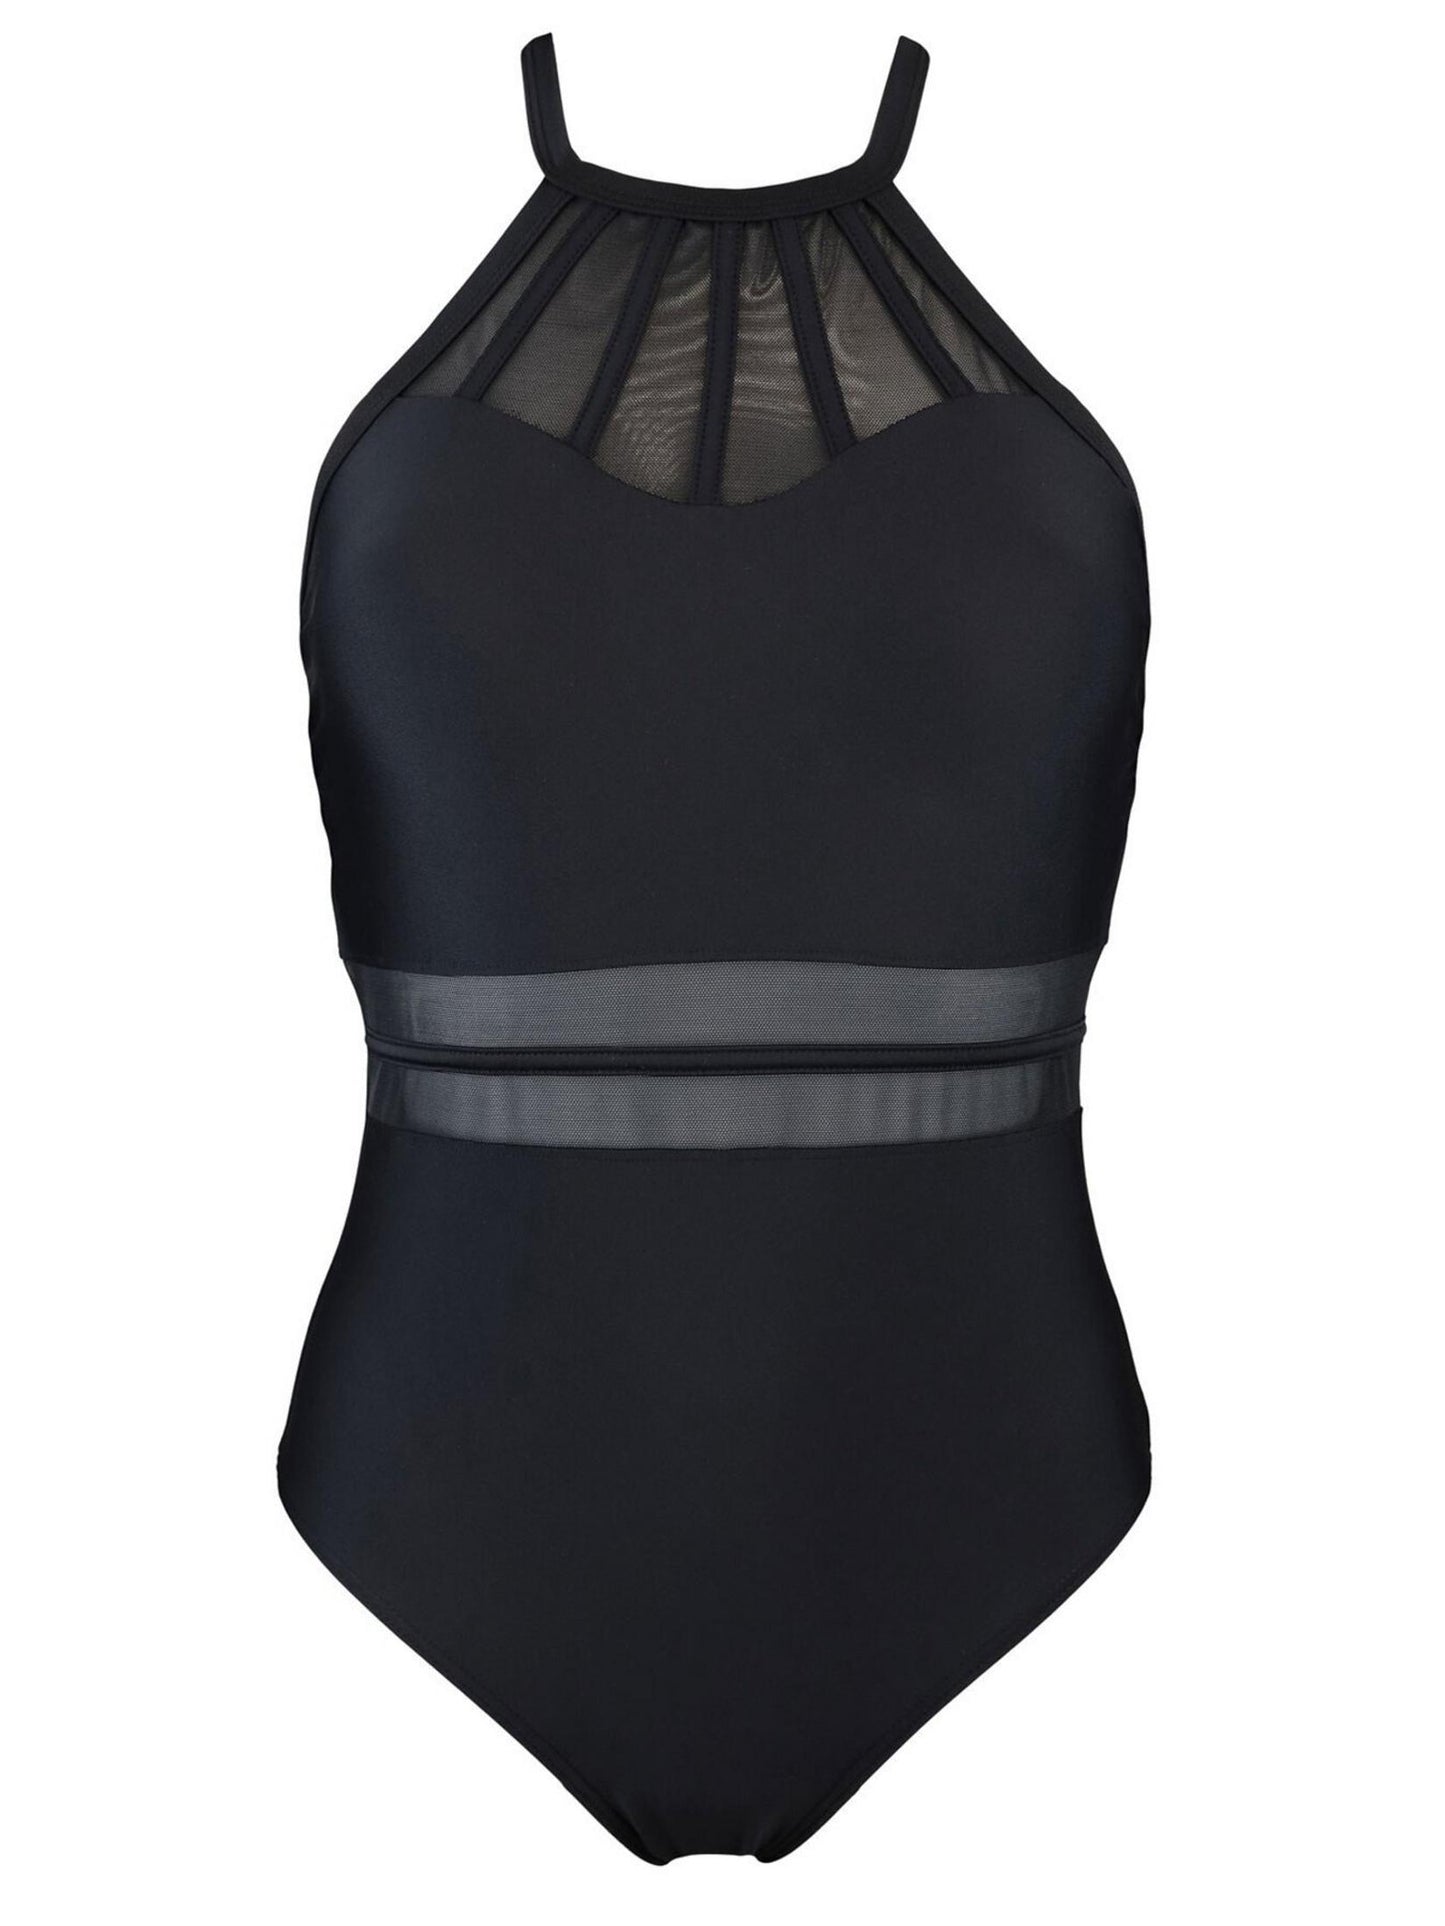 Pour Moi Beach Bound High Neck Swimsuit in Black